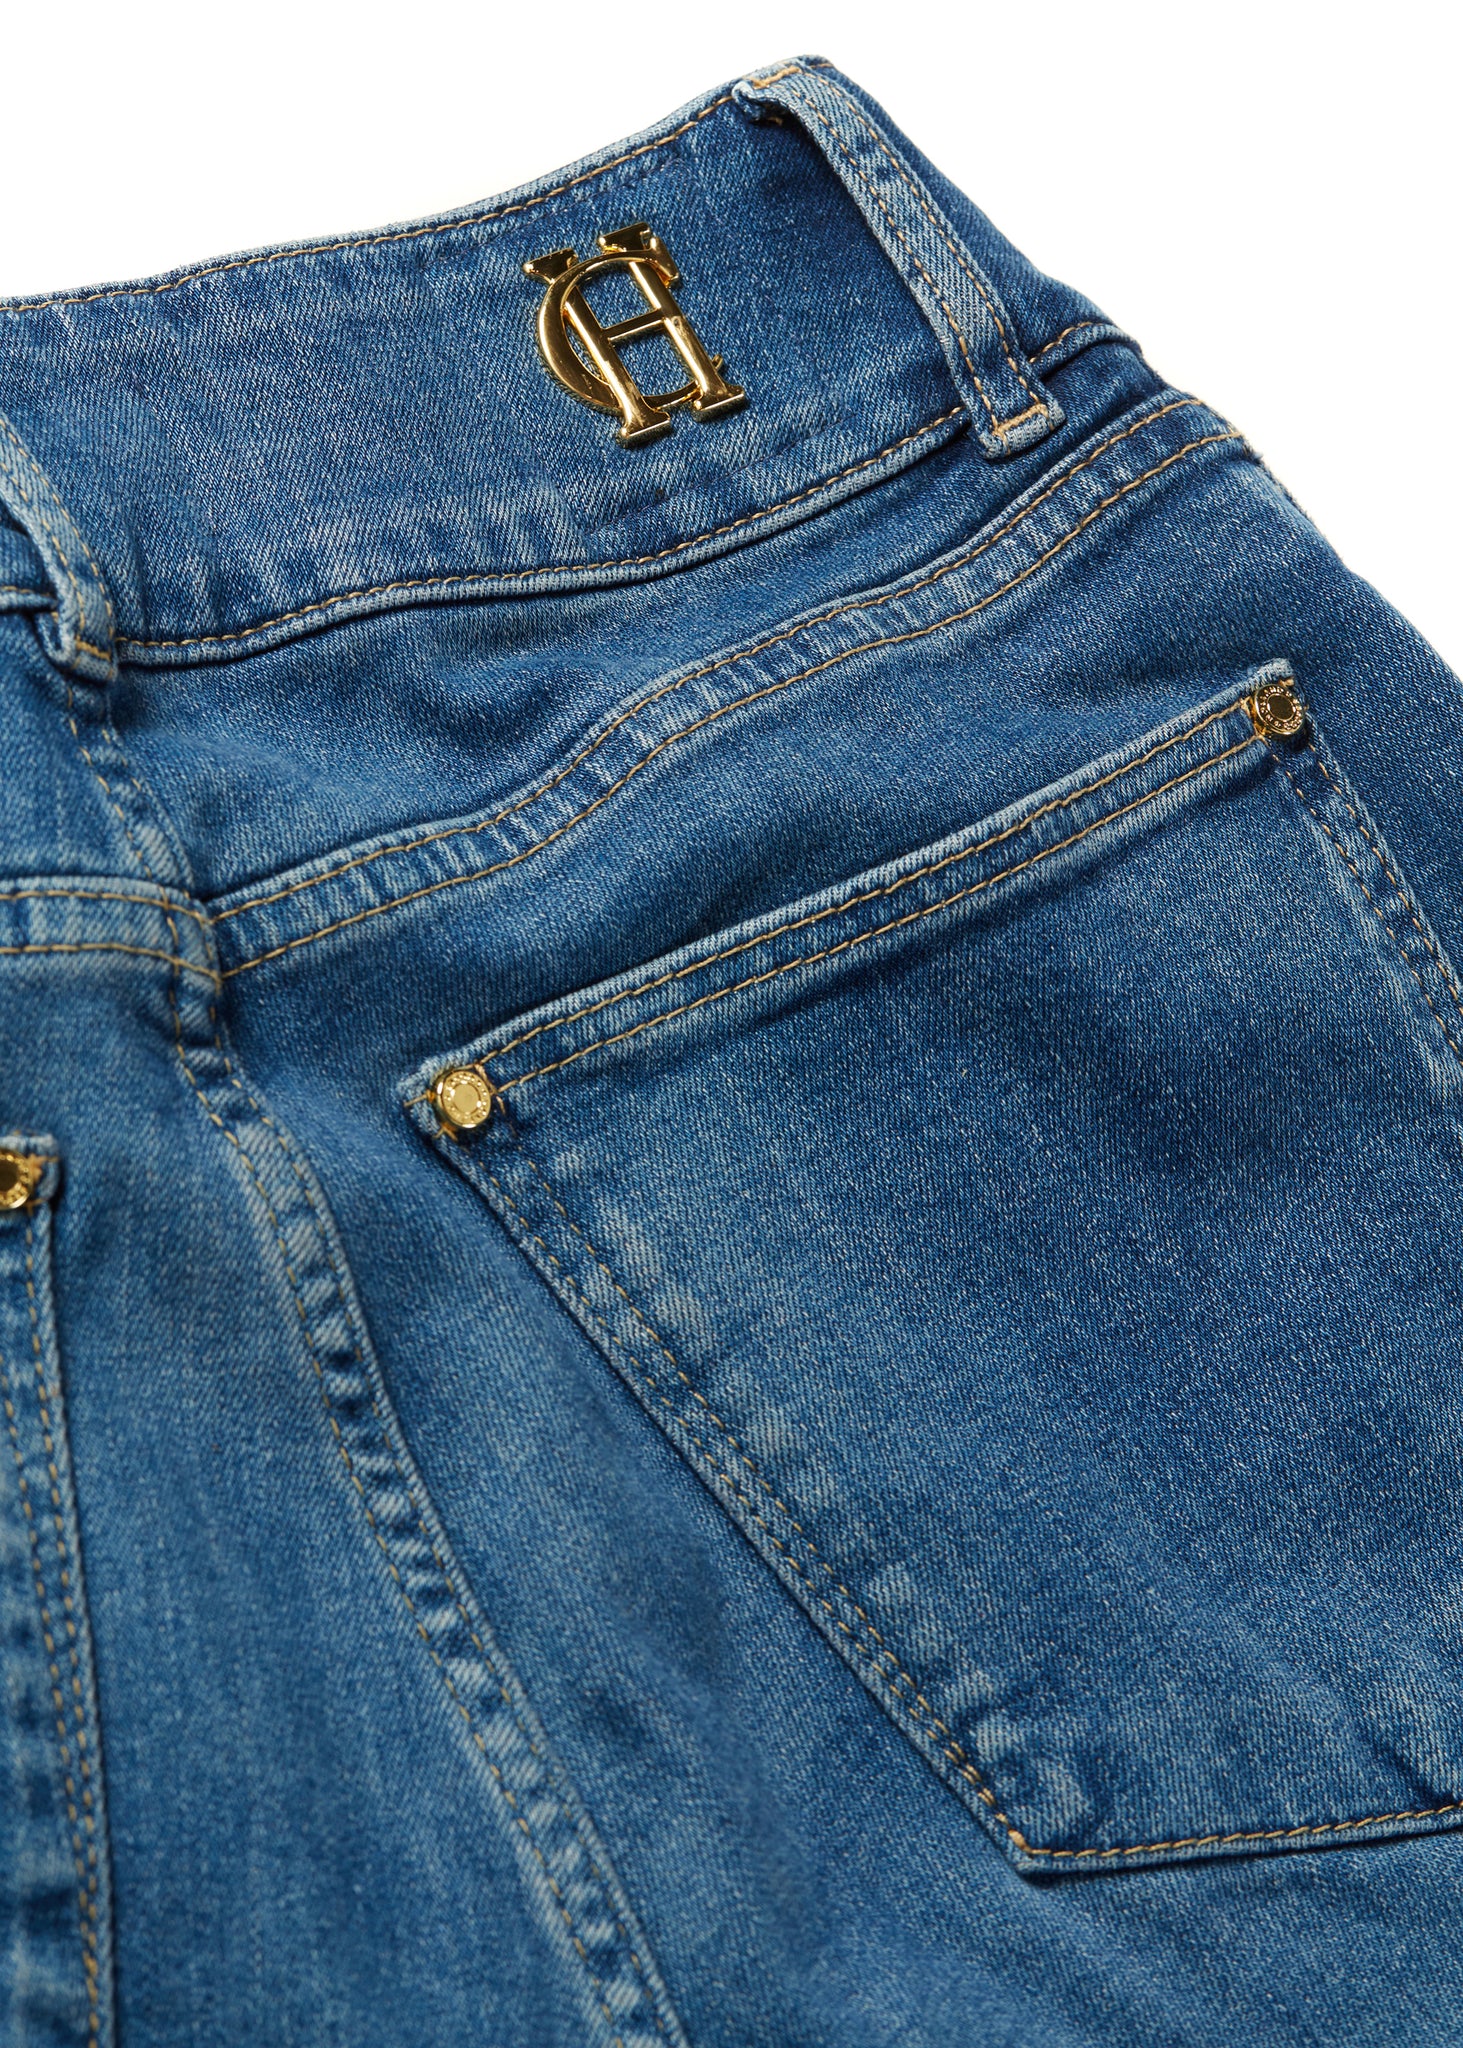 back pocket detail on womens high rise blue denim flared jean with centre front zip fly fastening with two open pockets at the front and back and gold hardware on back waistband